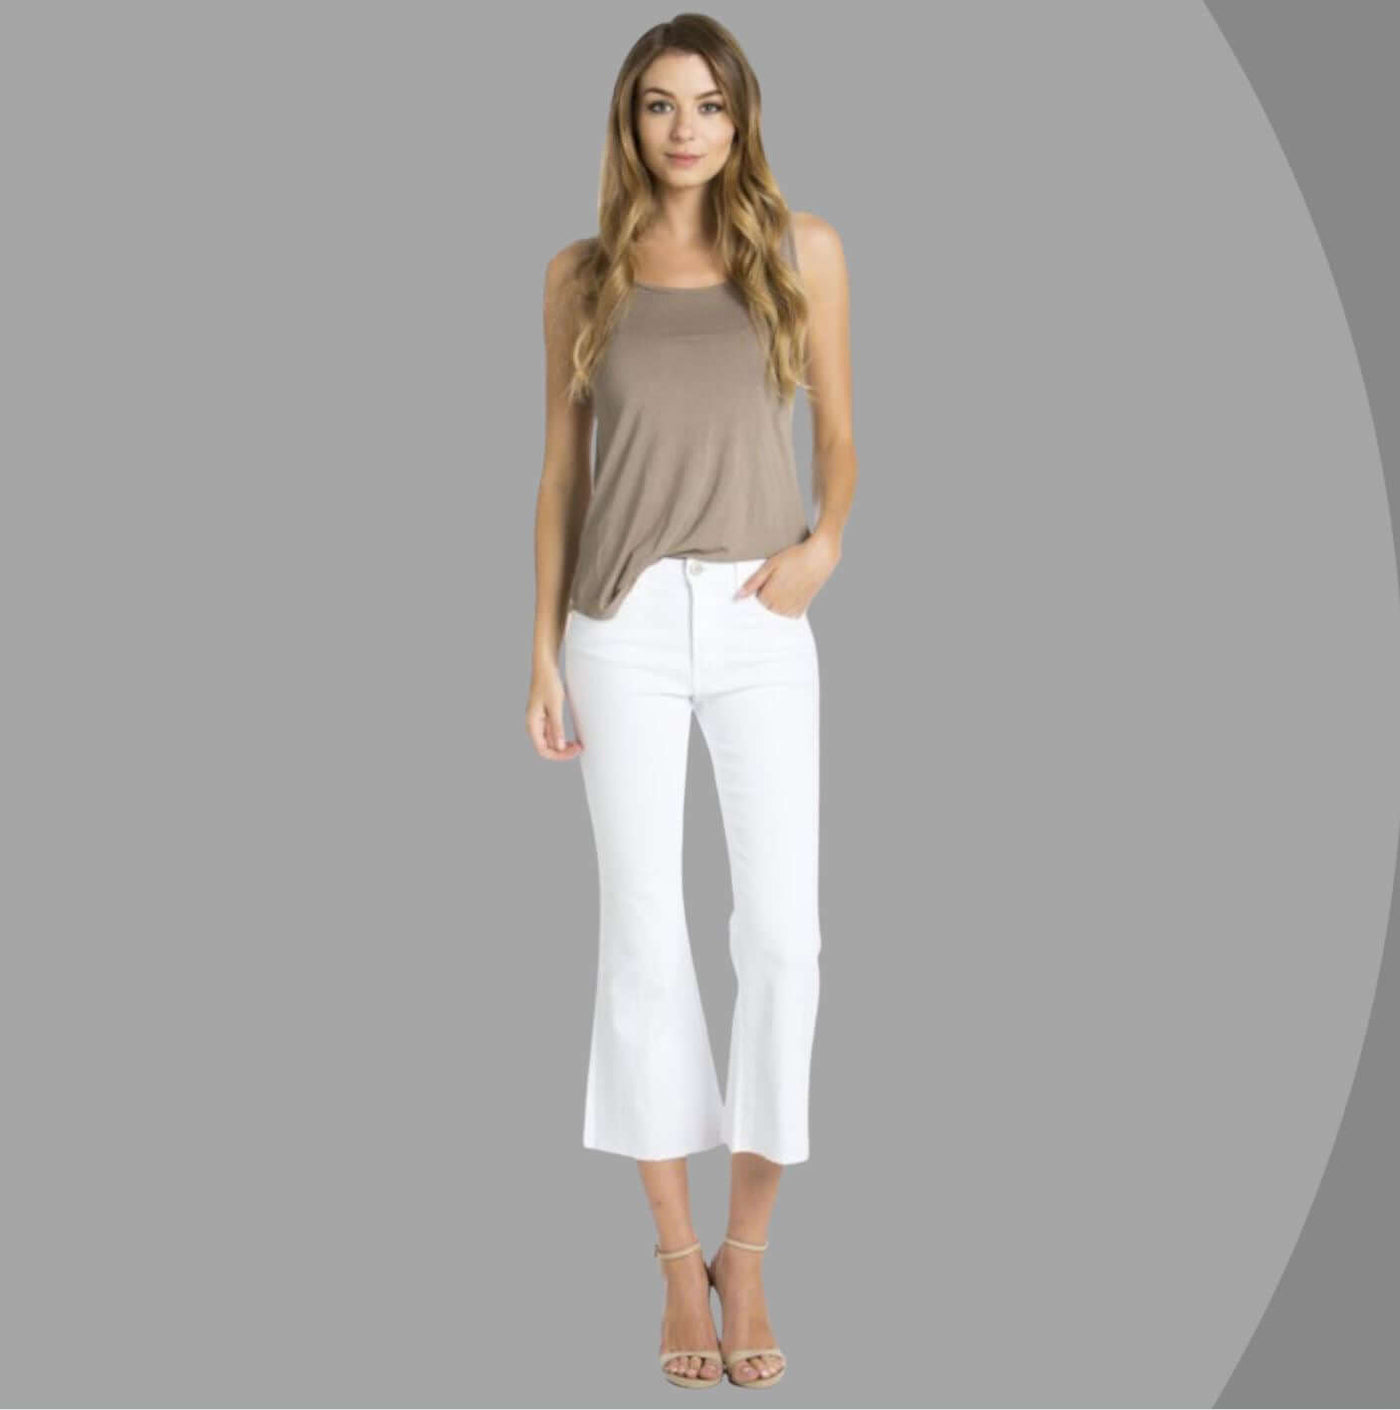 O2 Denim Ladies White Capri Denim Mid Rise Jeans with Raw Edge Hem Style# PT6011 | Made in USA | Classy Cozy Cool Women's Made in America Boutique